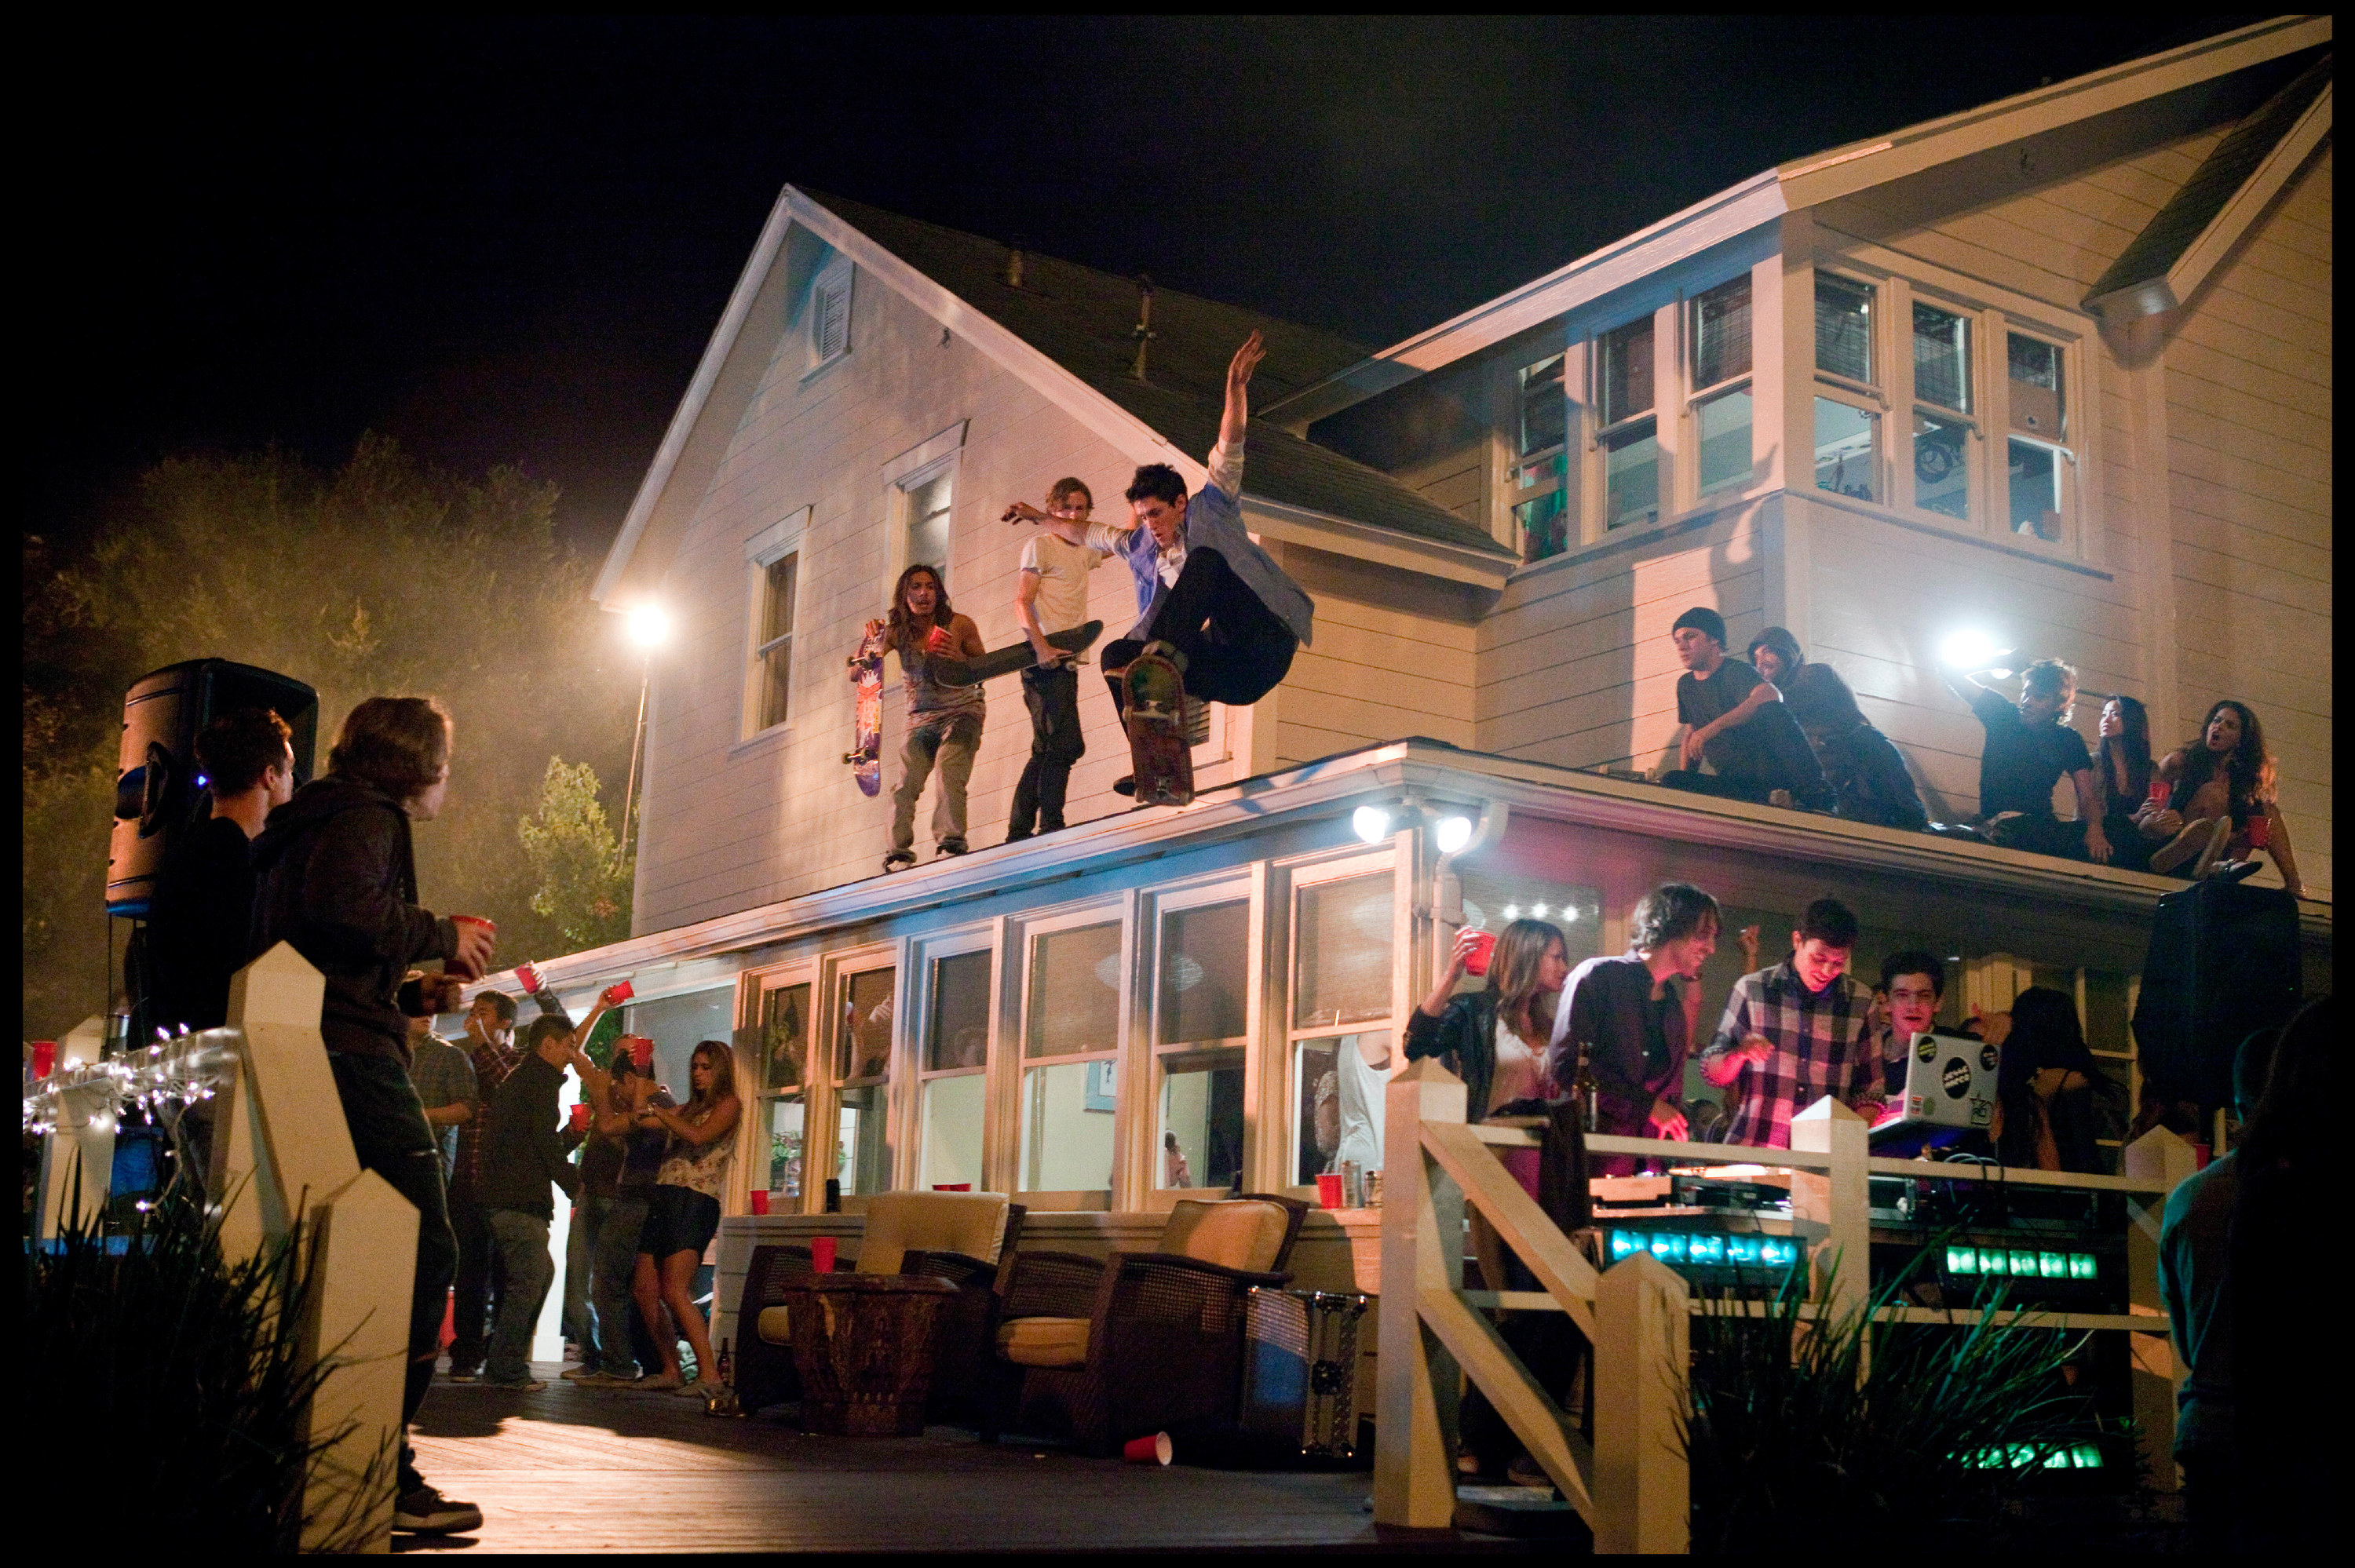 Young skateboarders leap off of a room at a nighttime house party